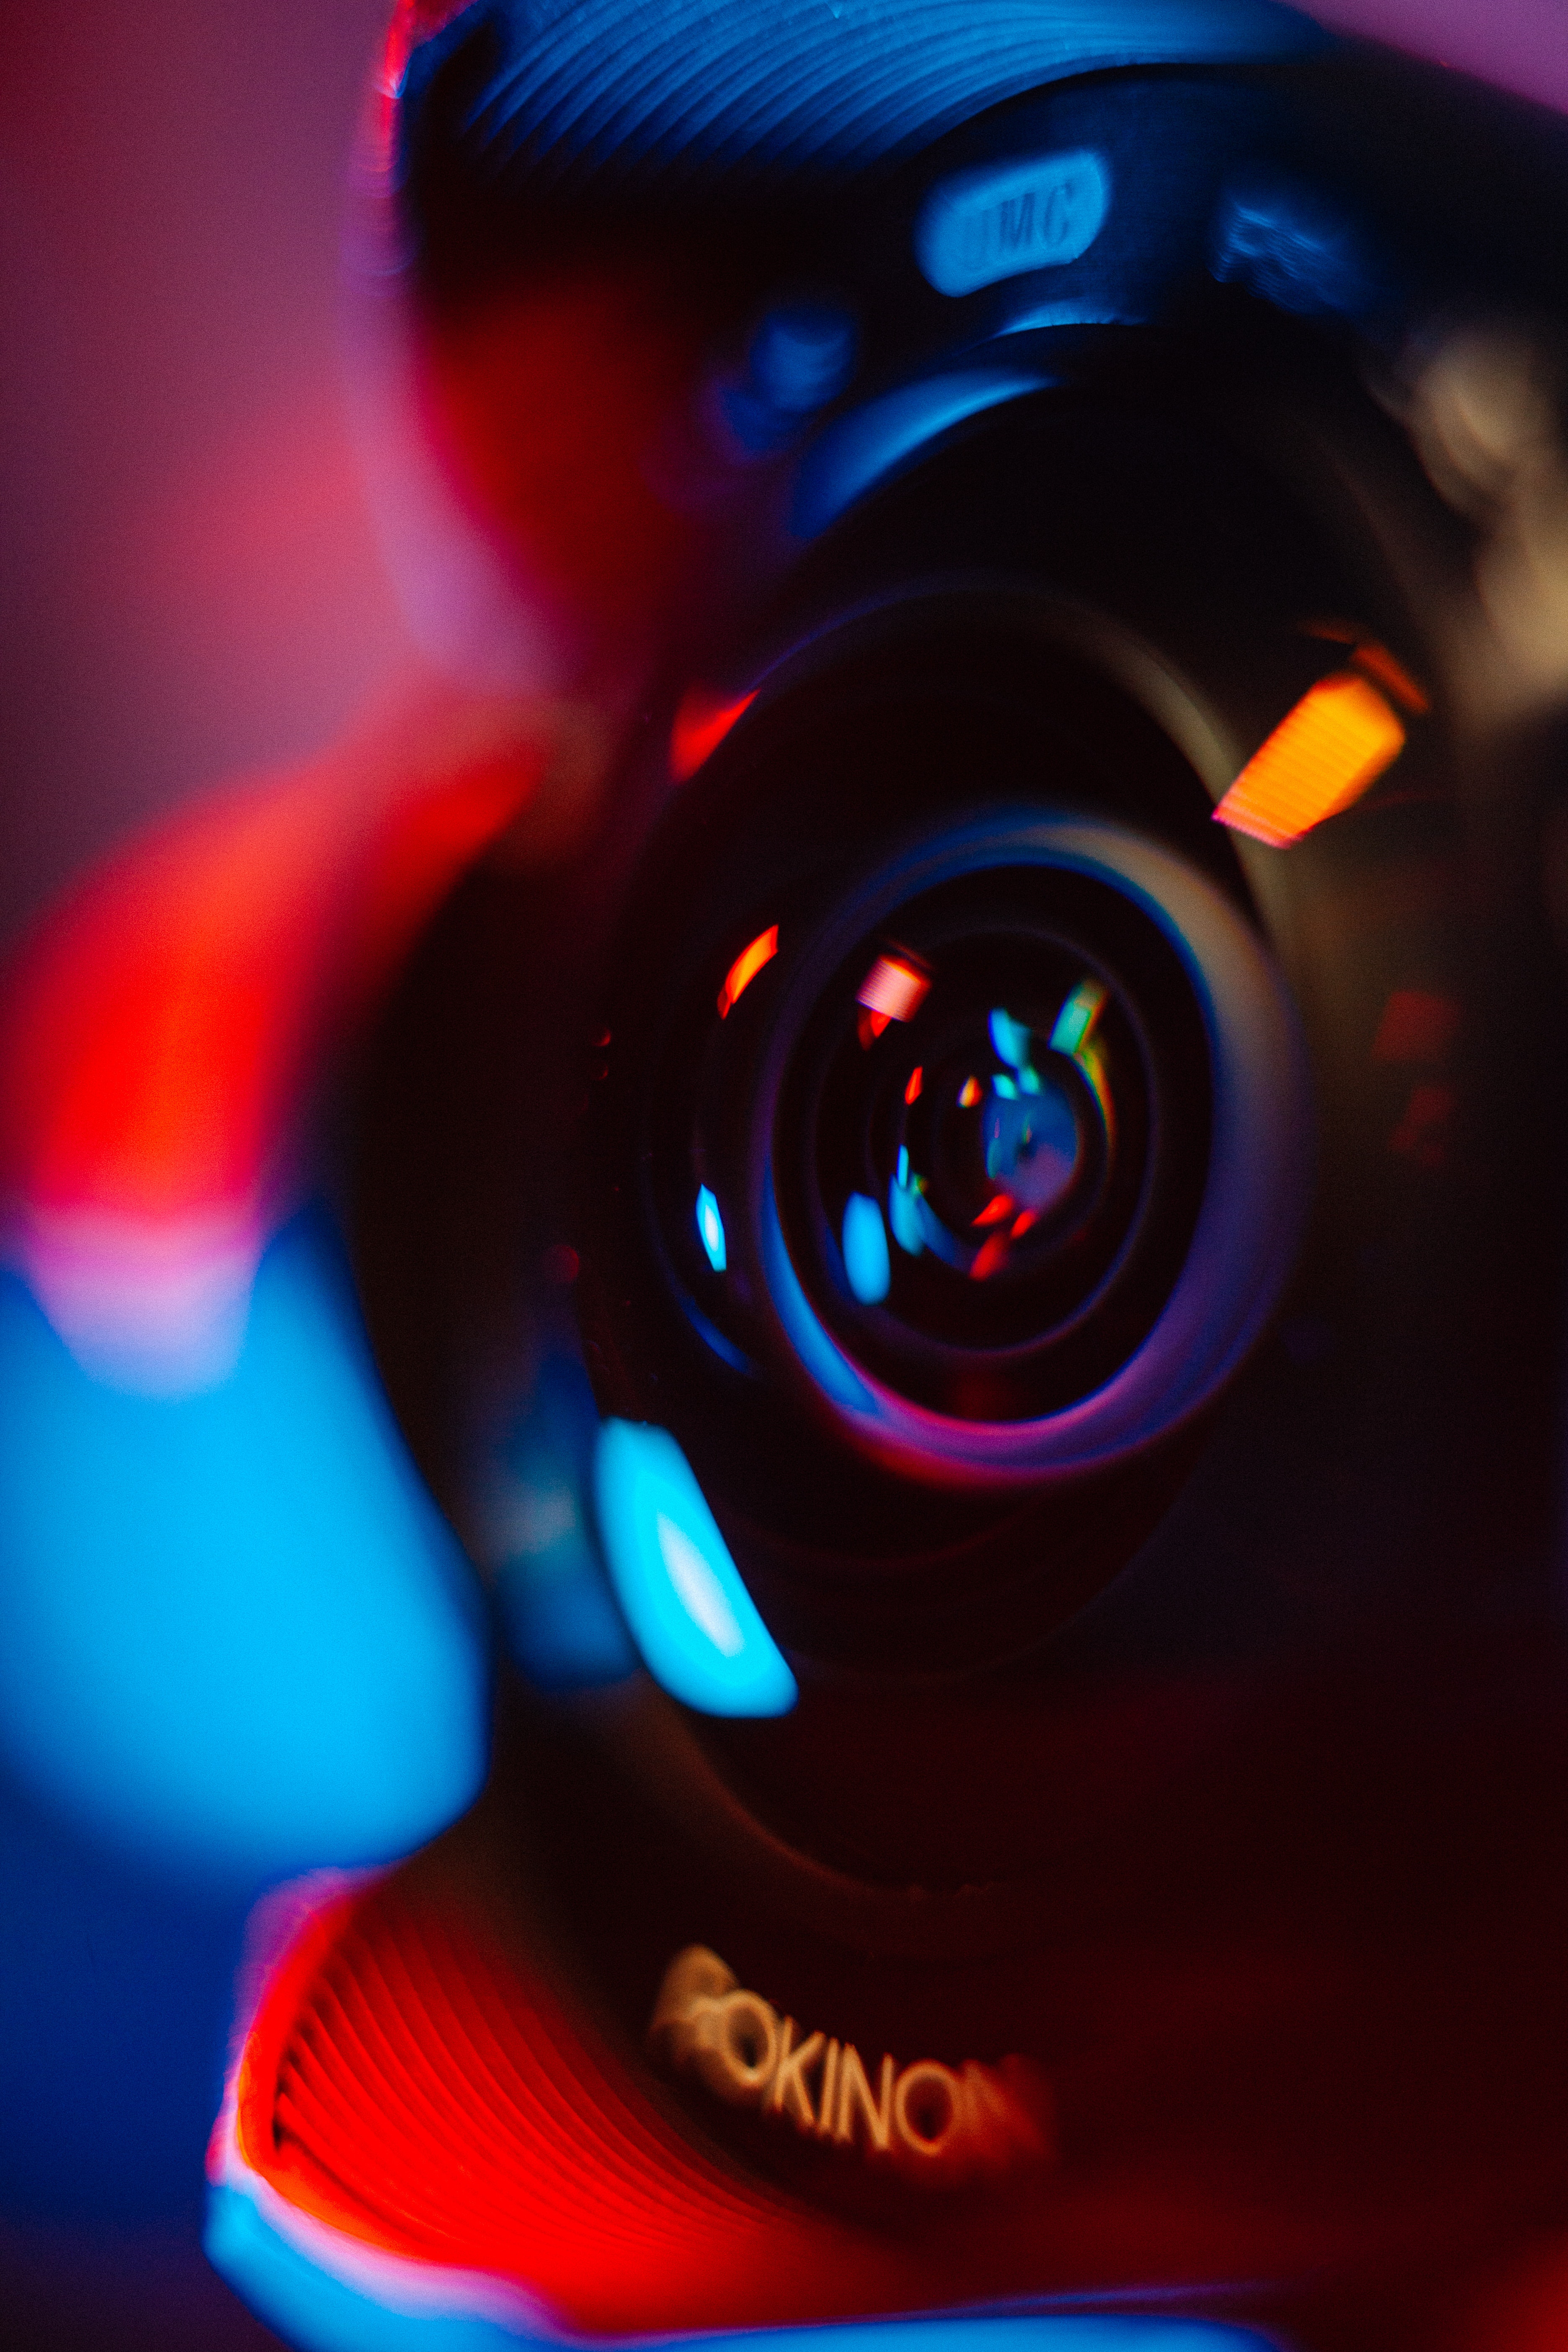 technology, lens, technologies, blur, glare, multicolored, motley, smooth, camera